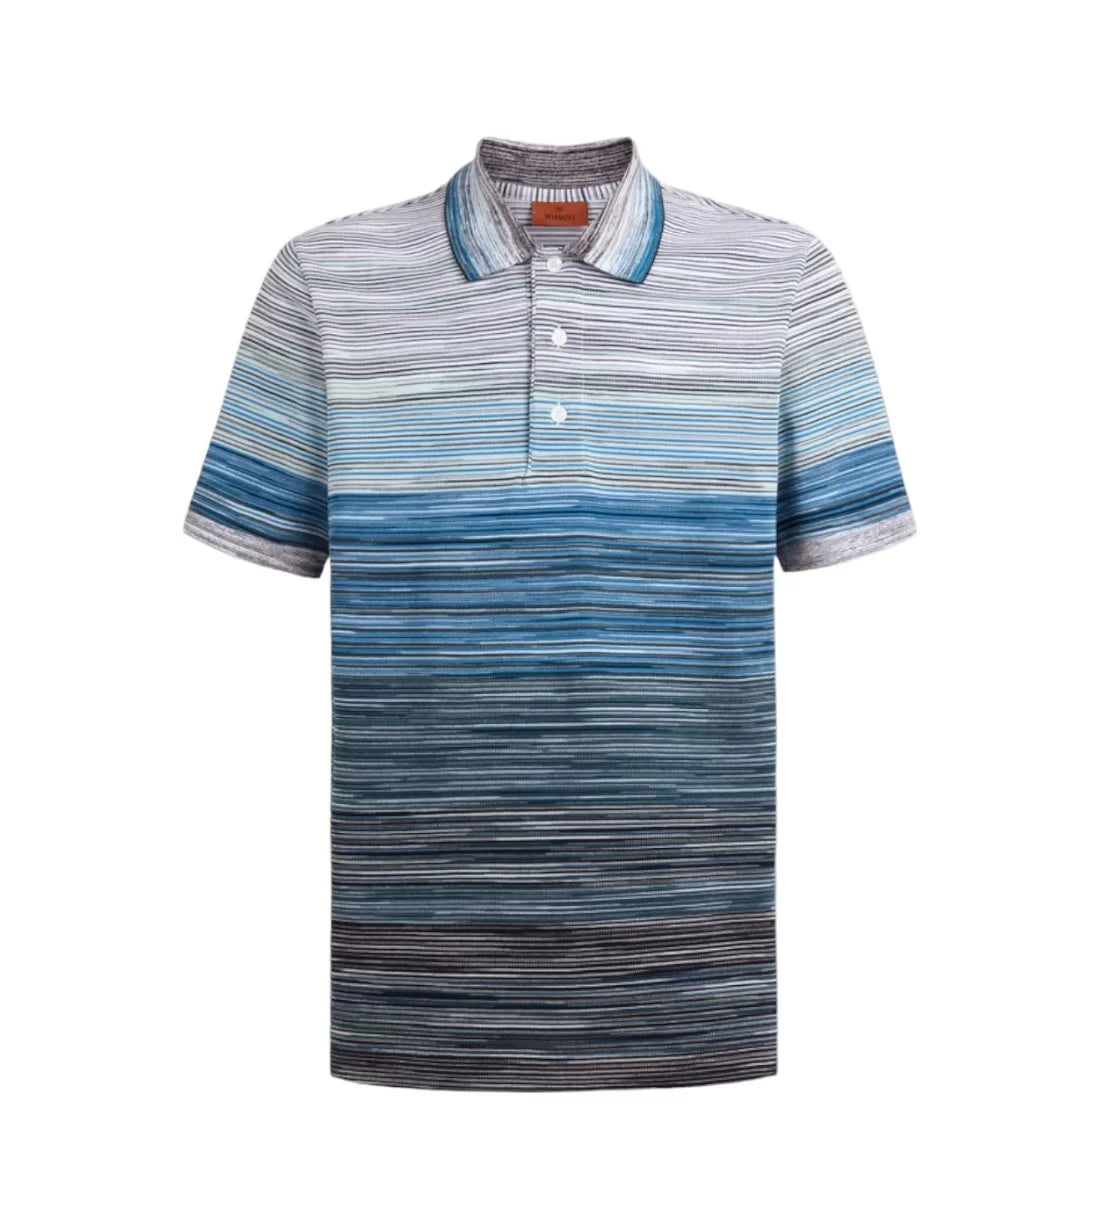 Missoni Men’s Knitted Stripe Polo Shirt Blue - Front View